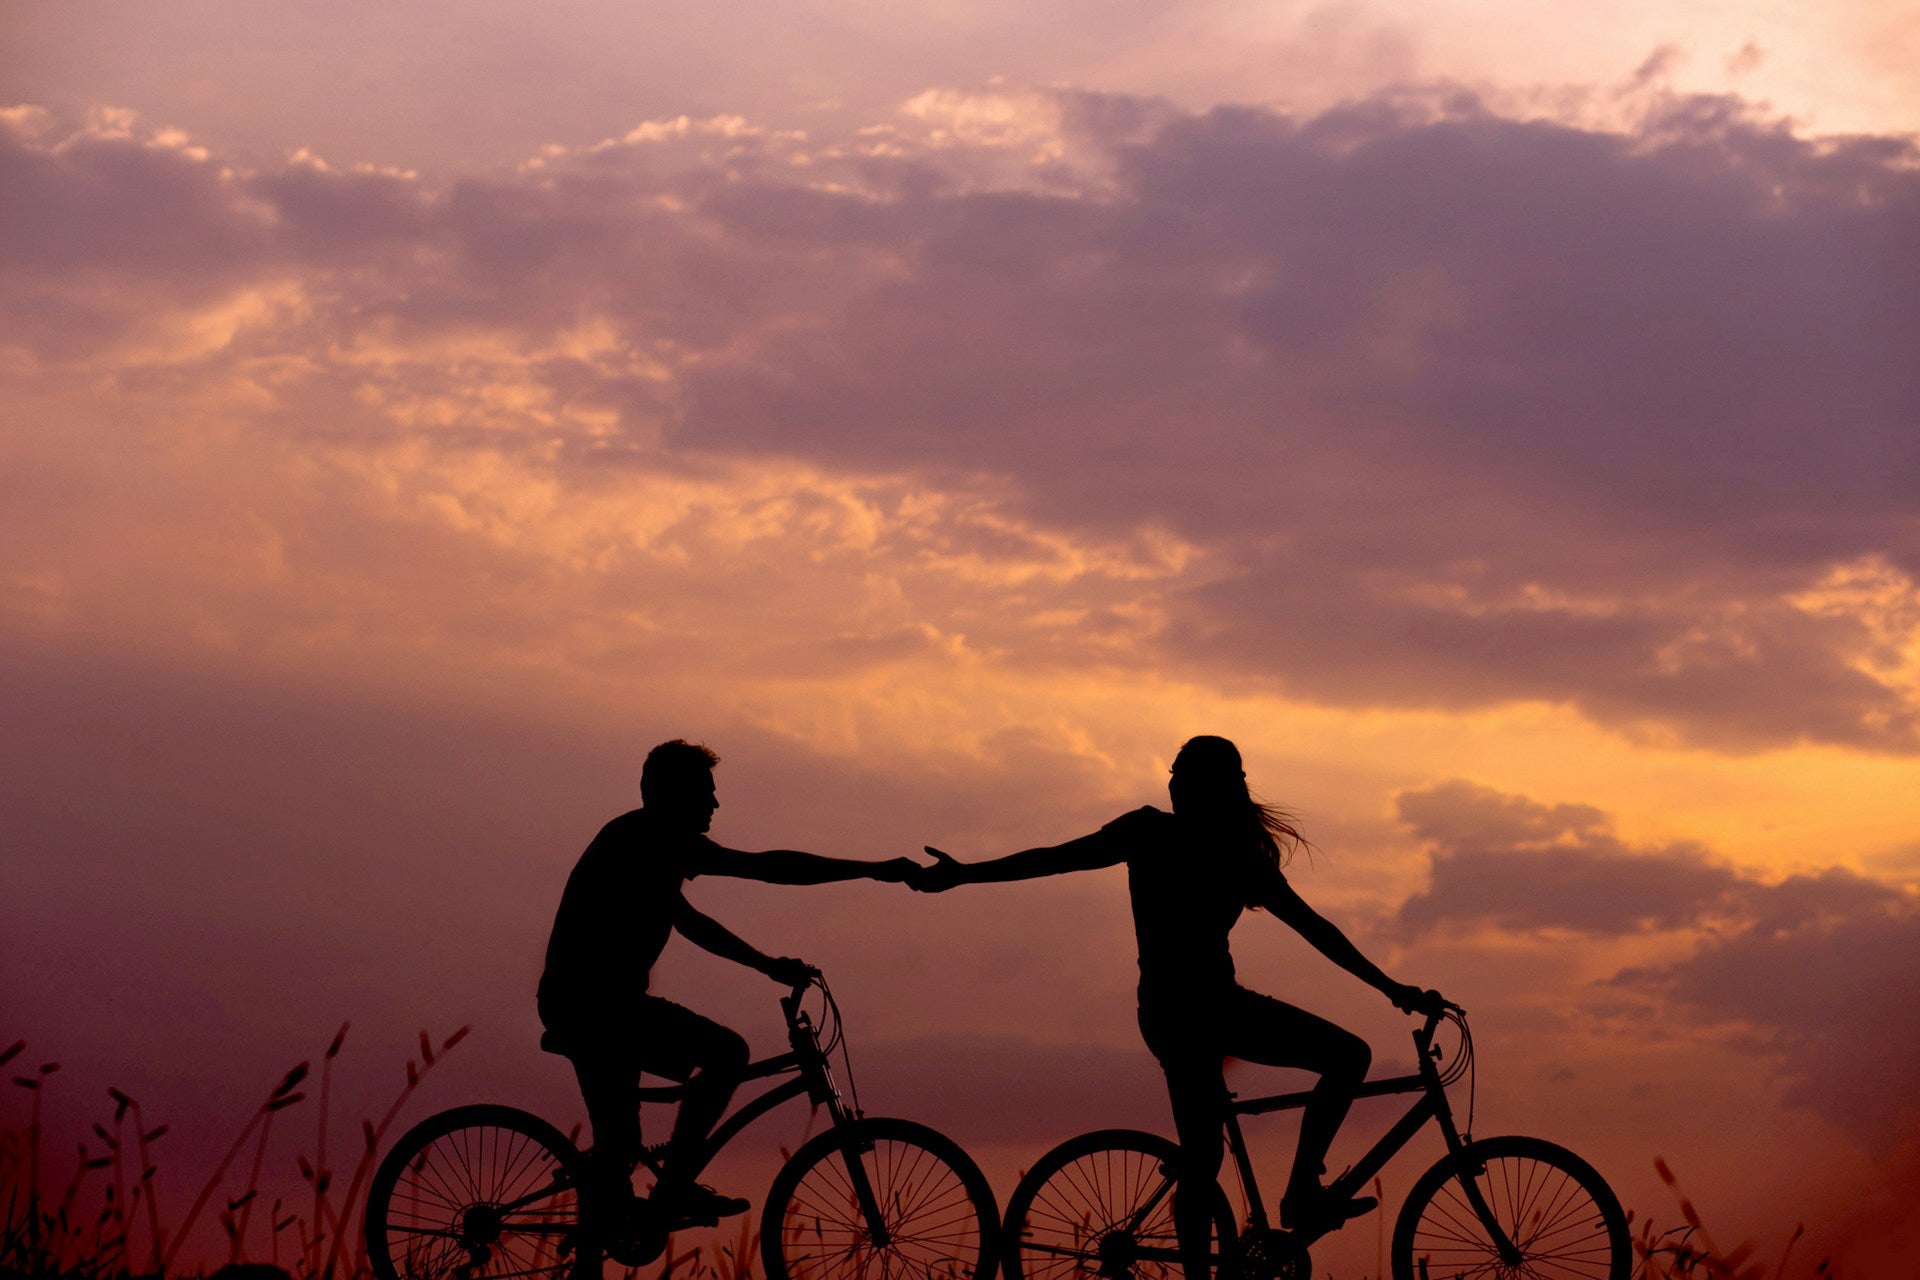 A couple riding bikes while reaching for each other with a pink sunset sky in the background